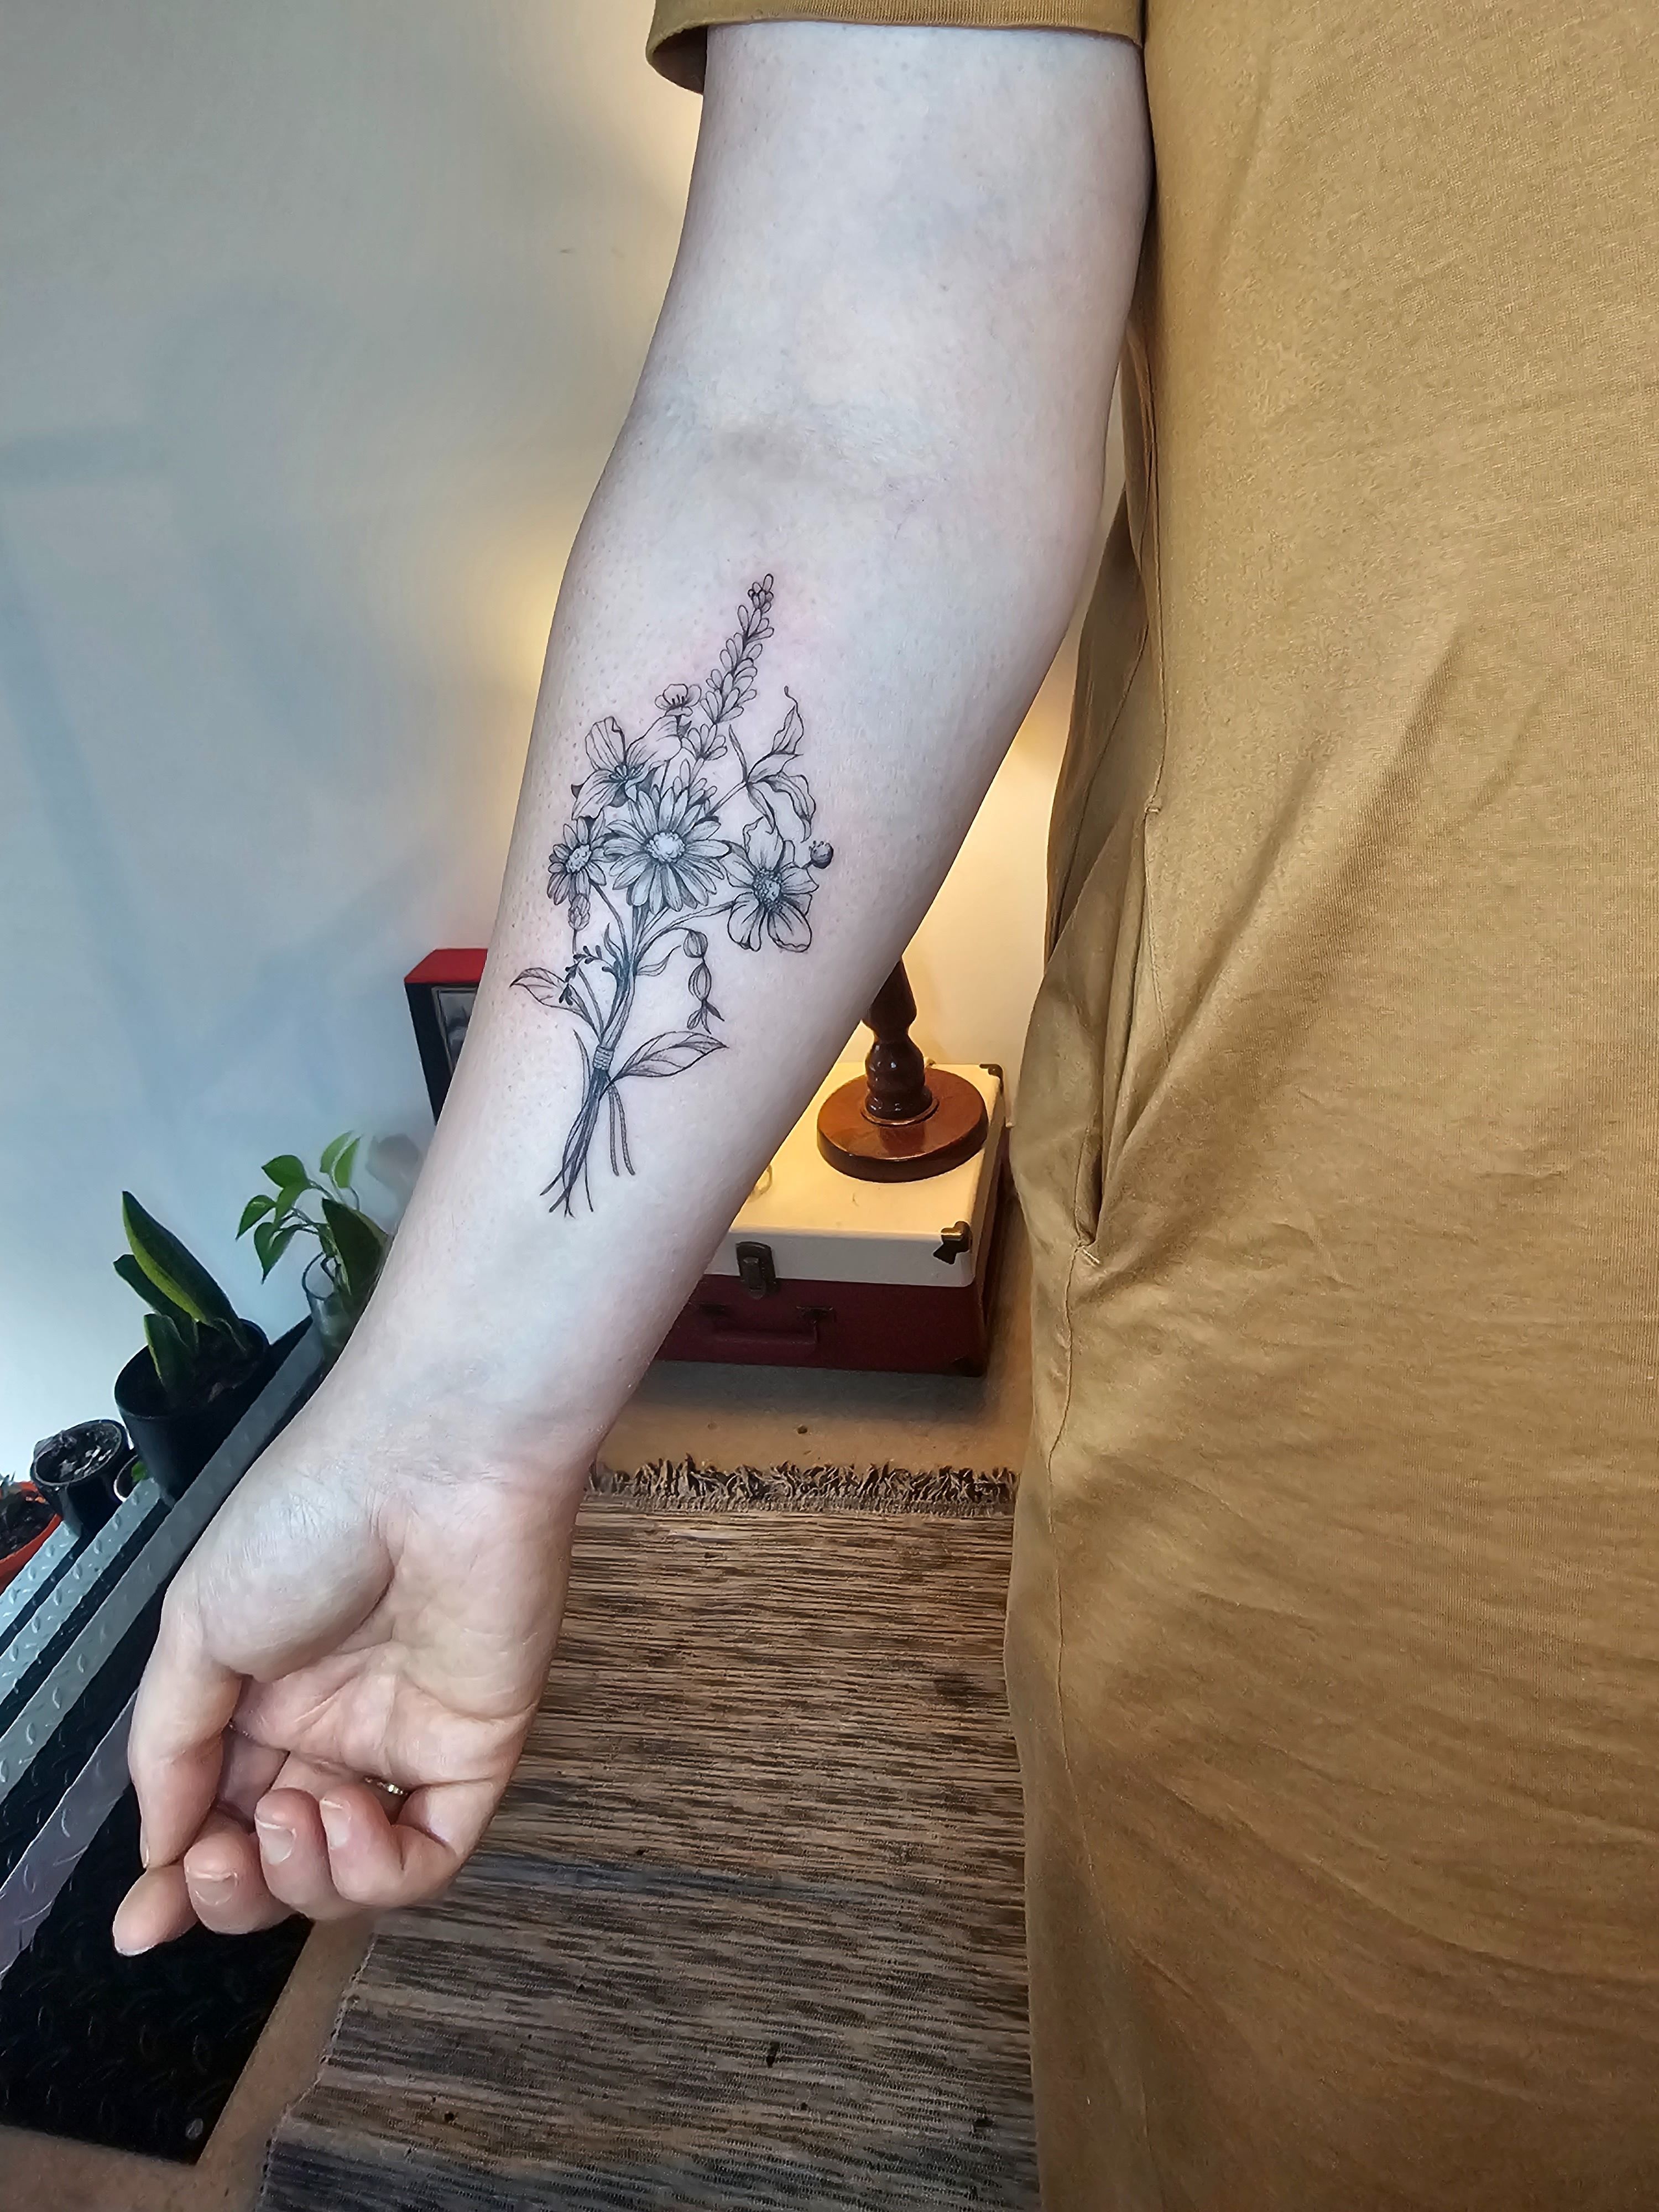 Flower bouquet tattoo located on the inner forearm.